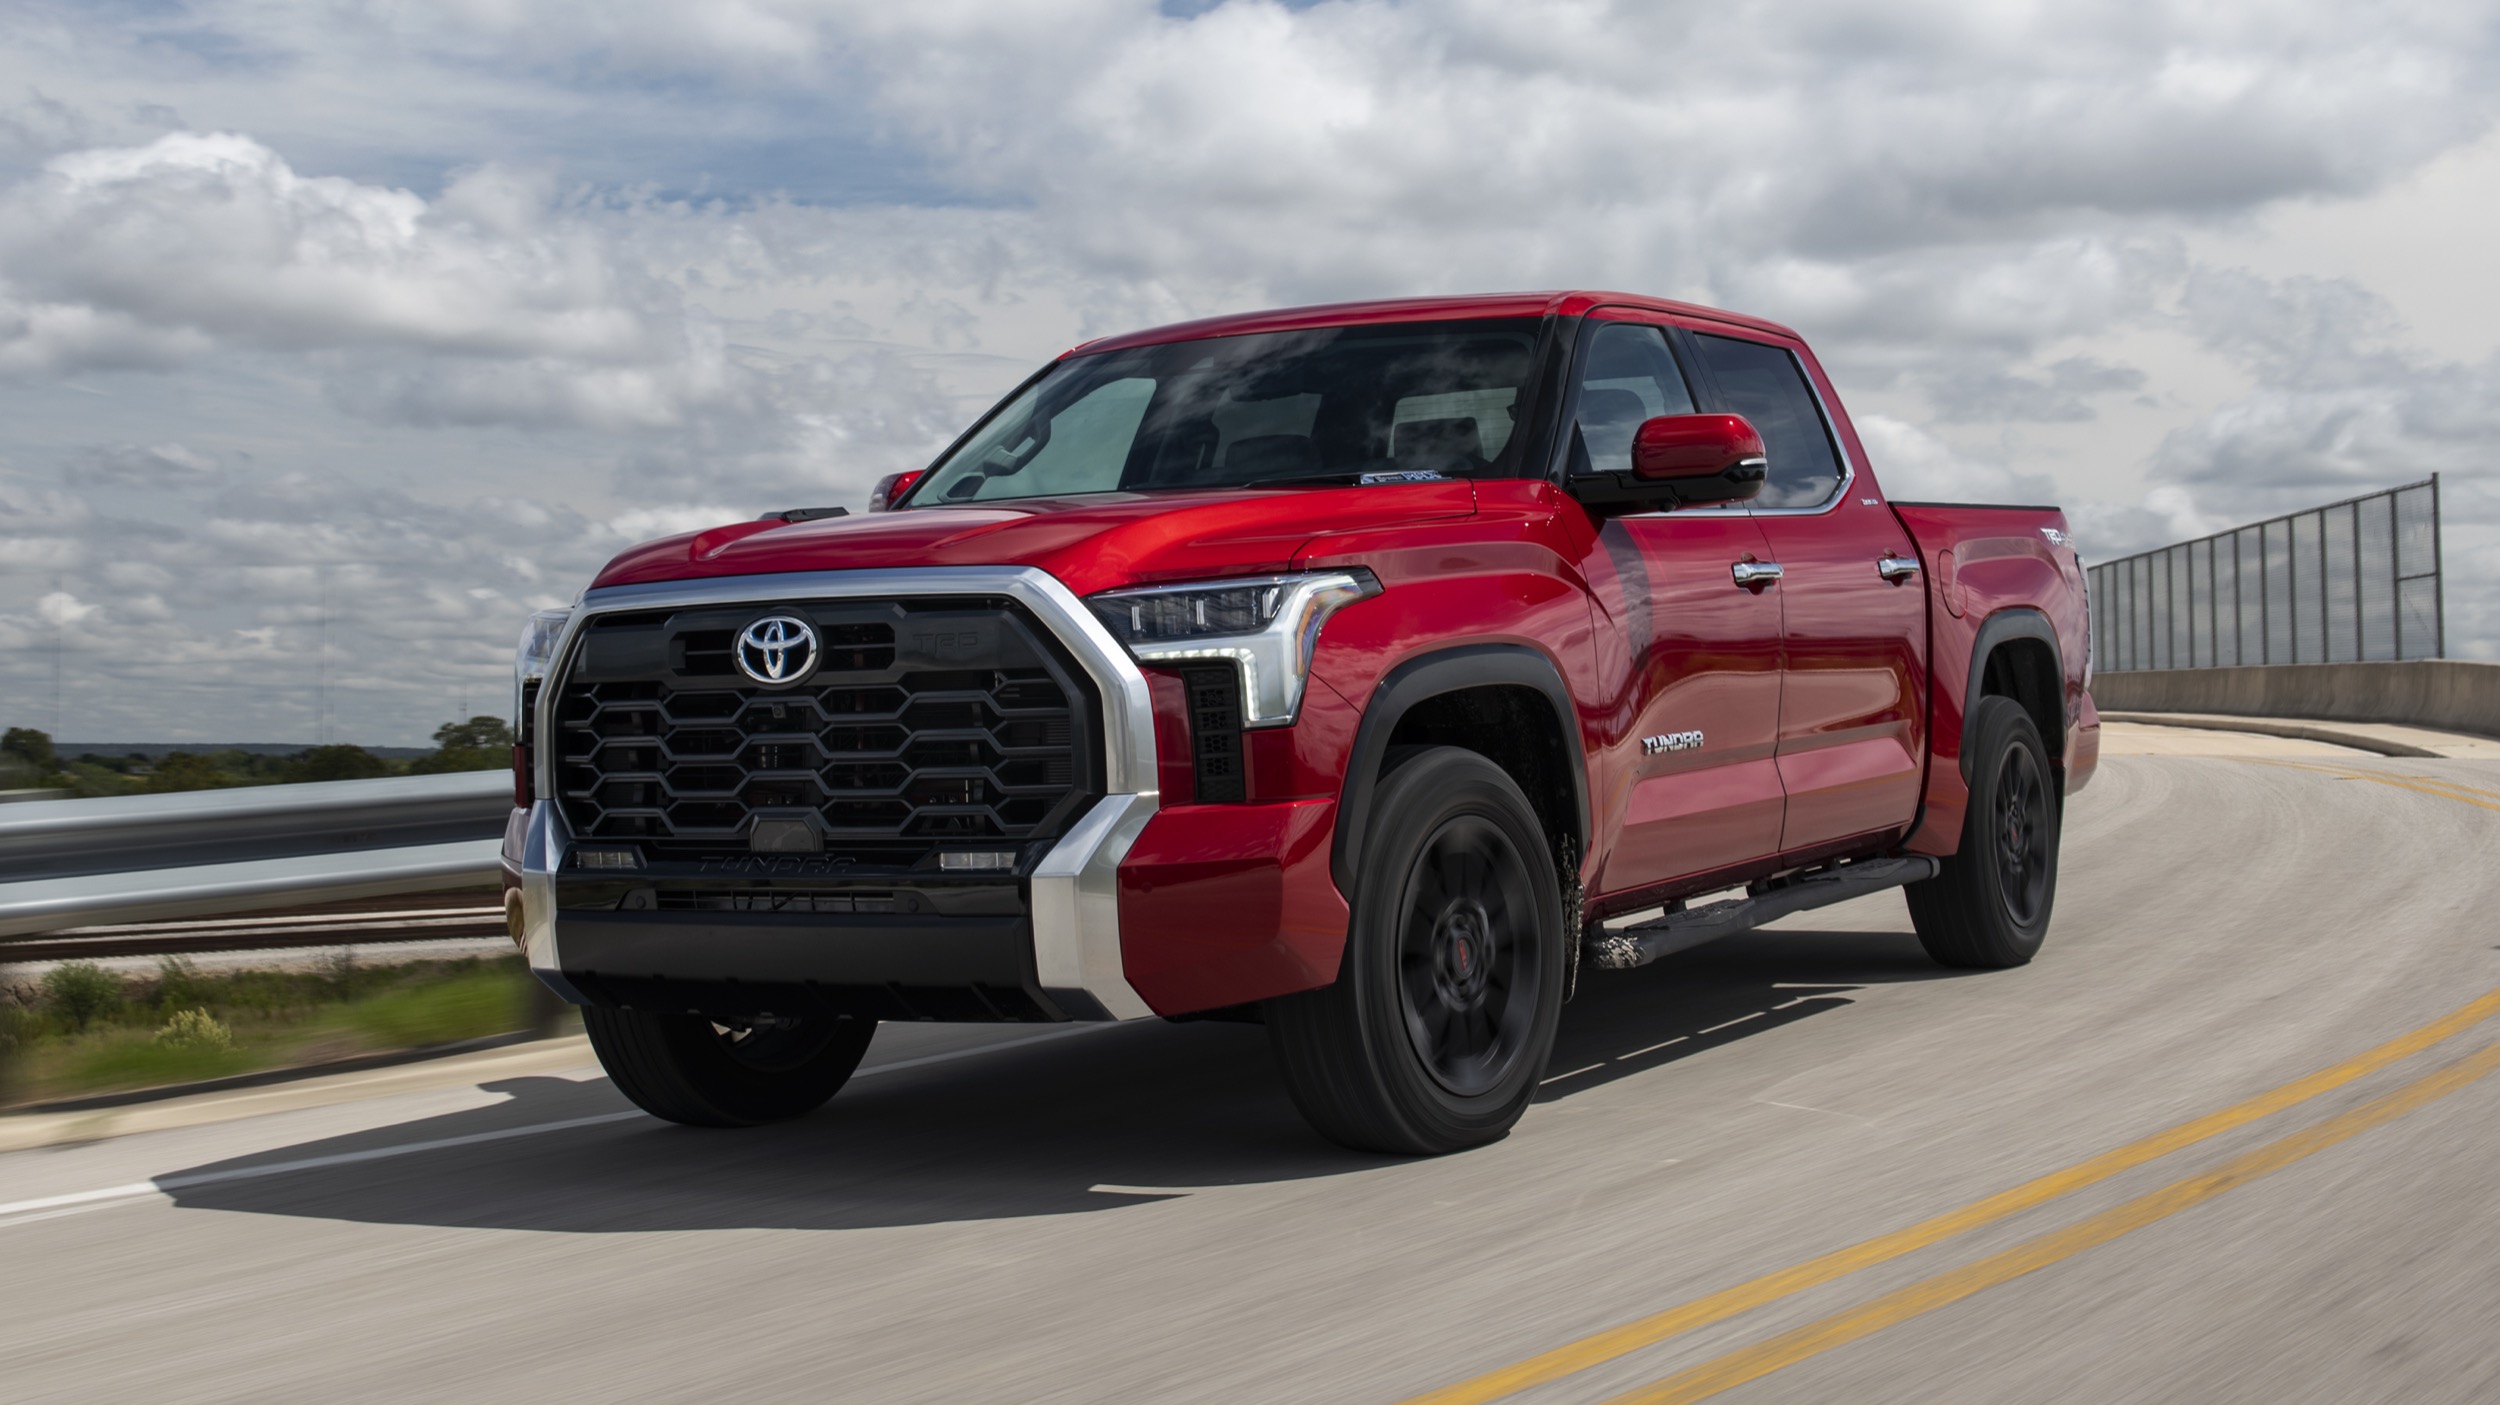 2022 Toyota Tundra Limited TRD OffRoad Photo Gallery